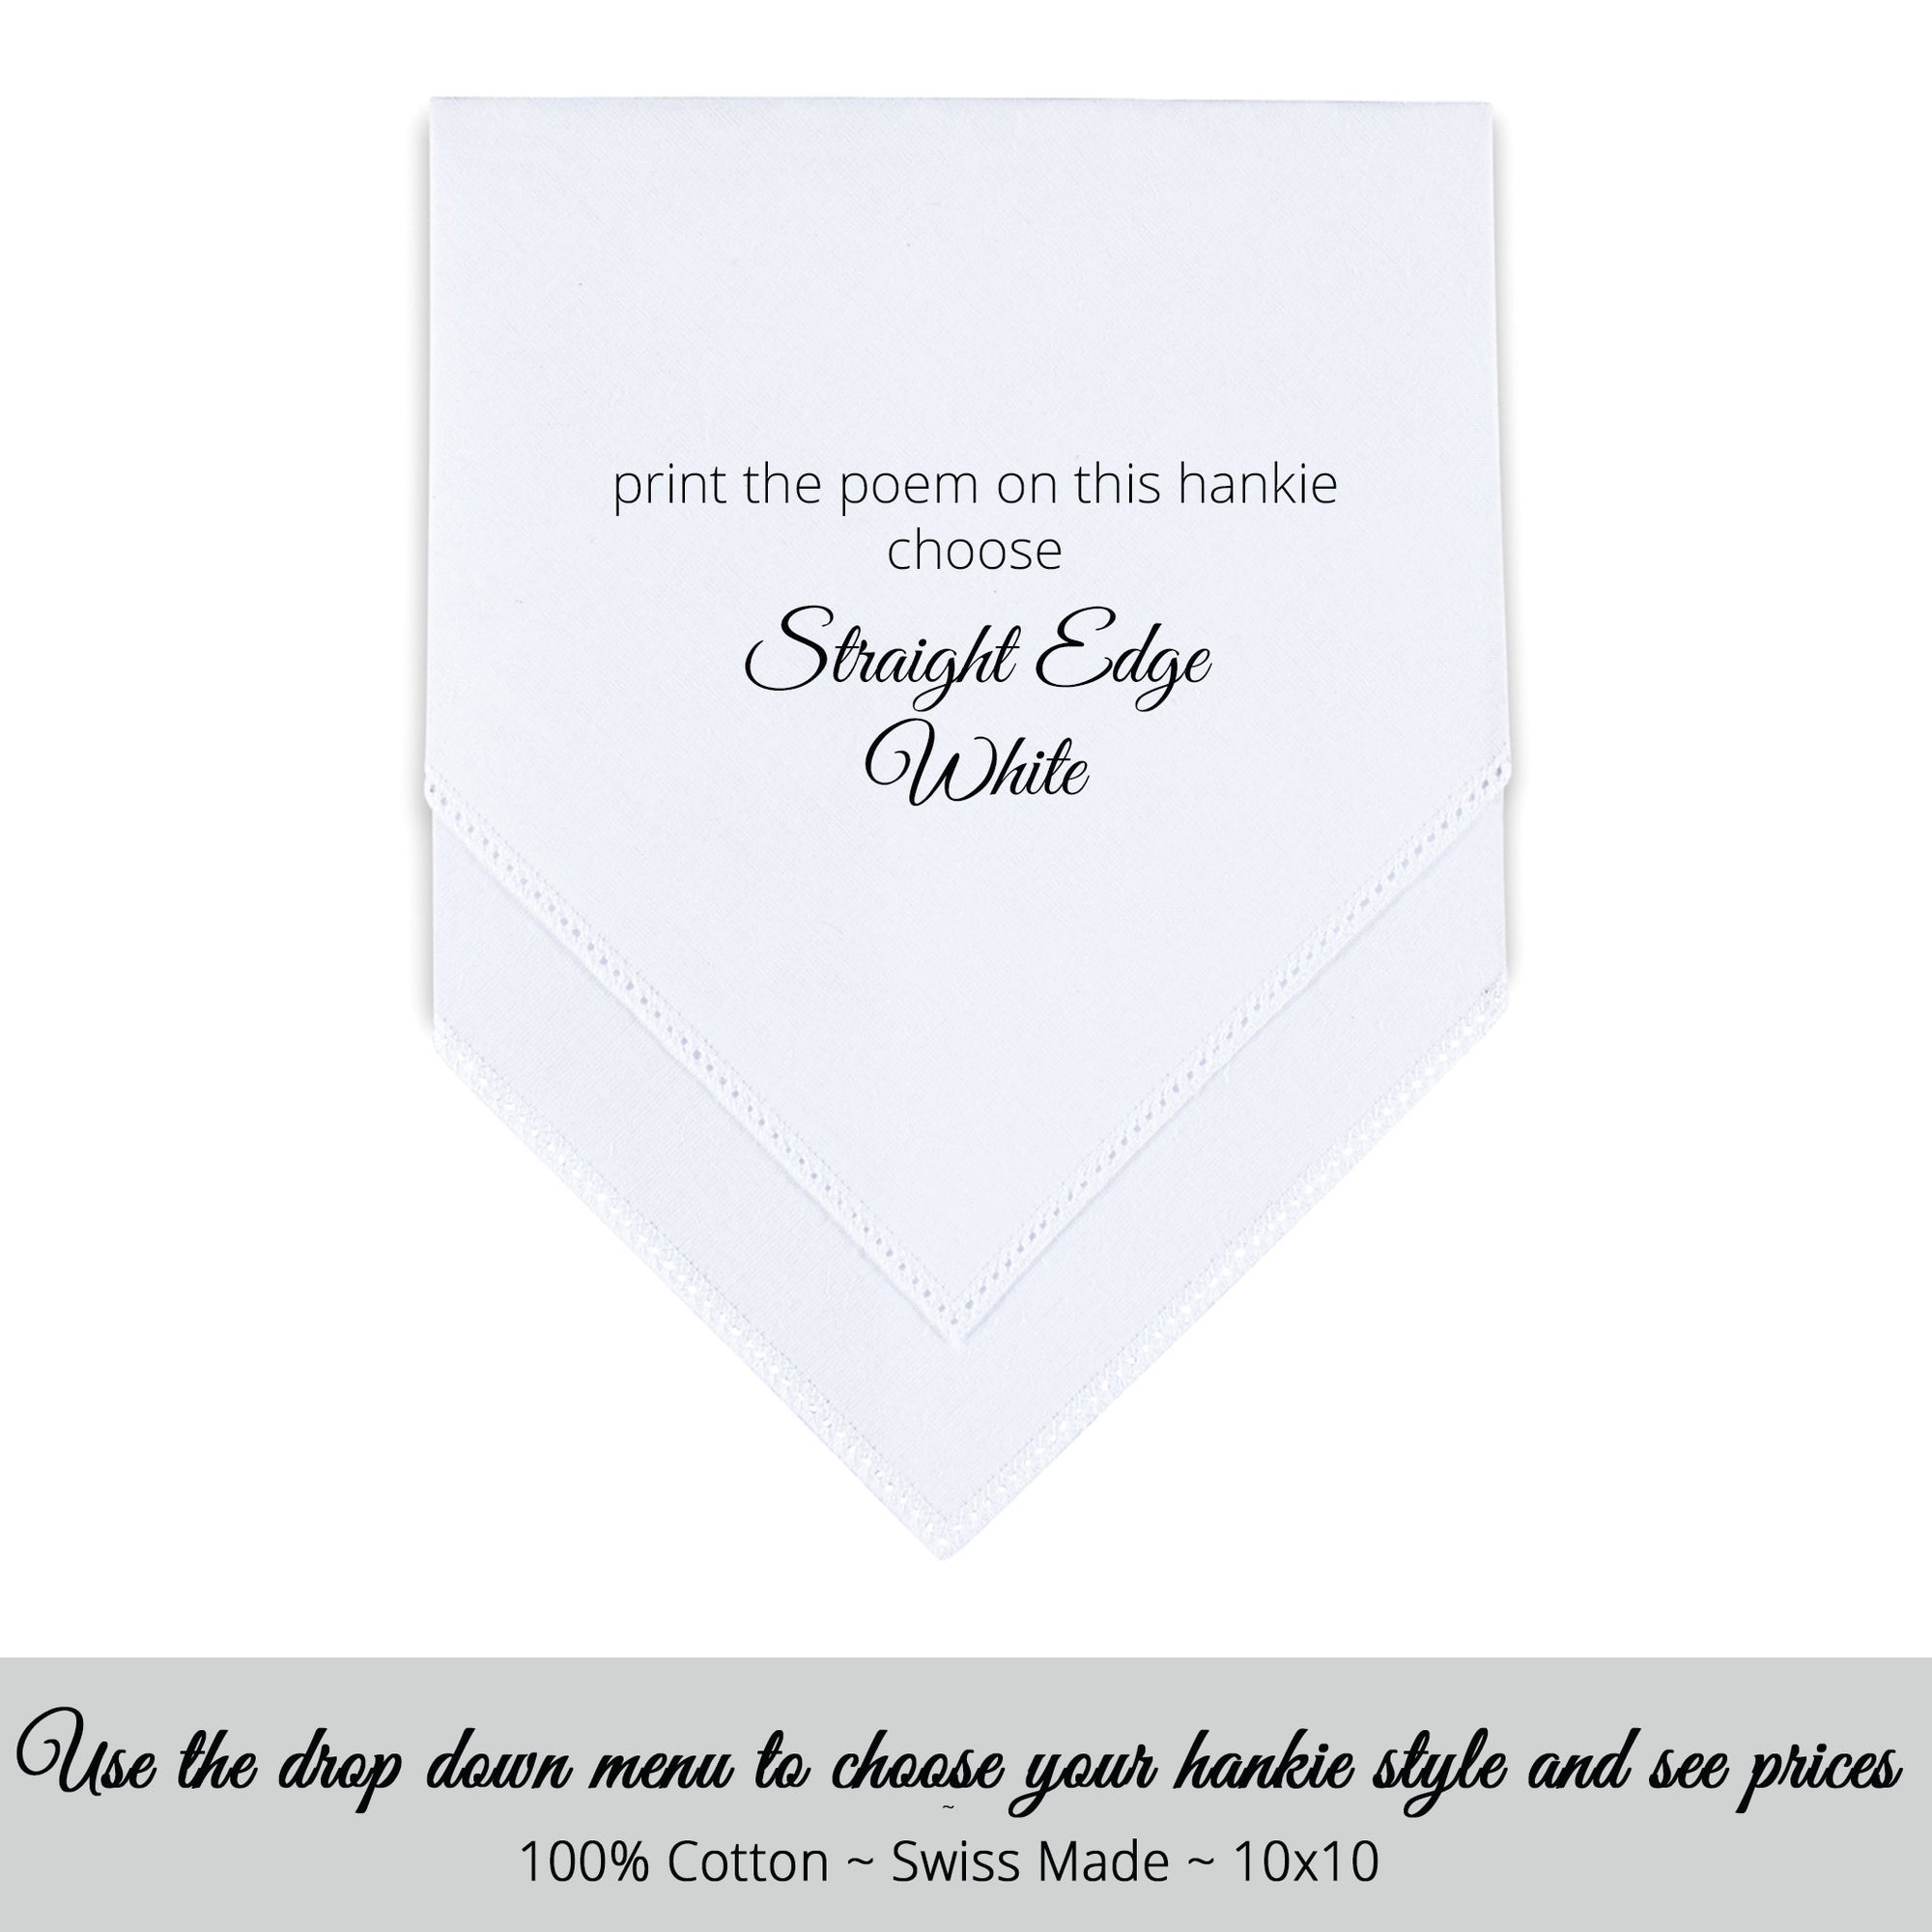 Wedding Handkerchief Scalloped edge white personalized poem for the officiant